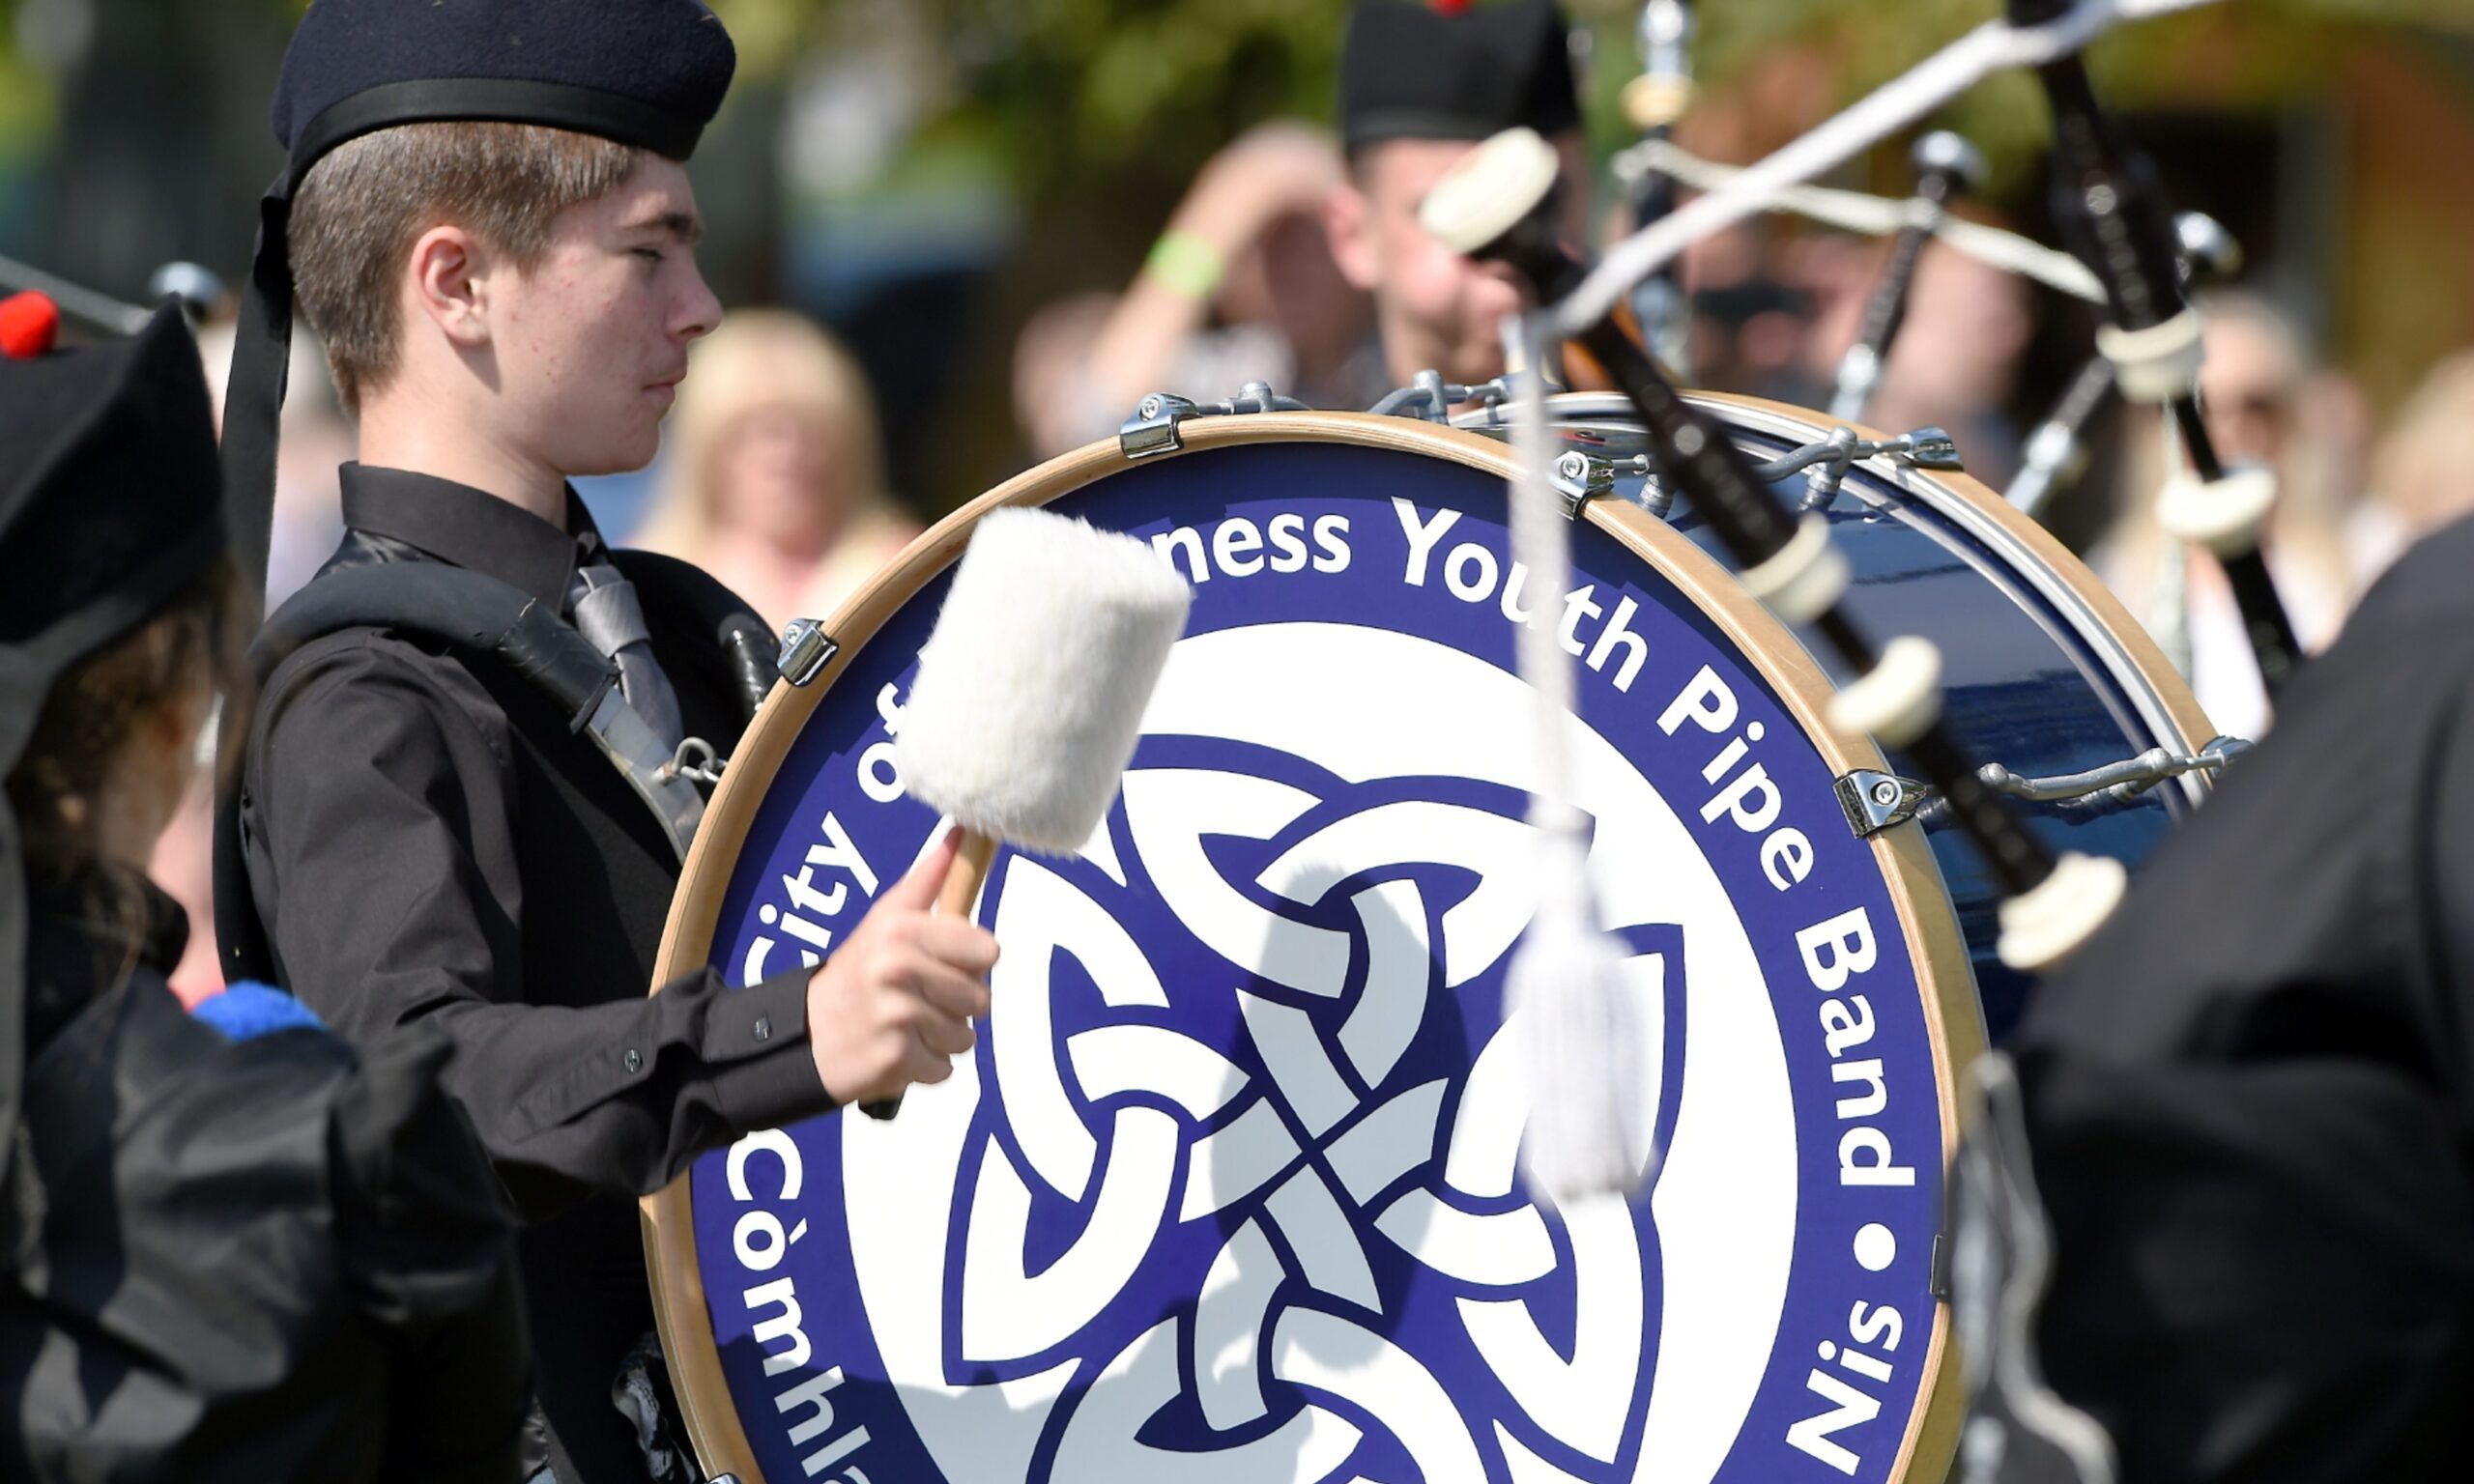 City of Inverness Youth Pipe Band drummer. 